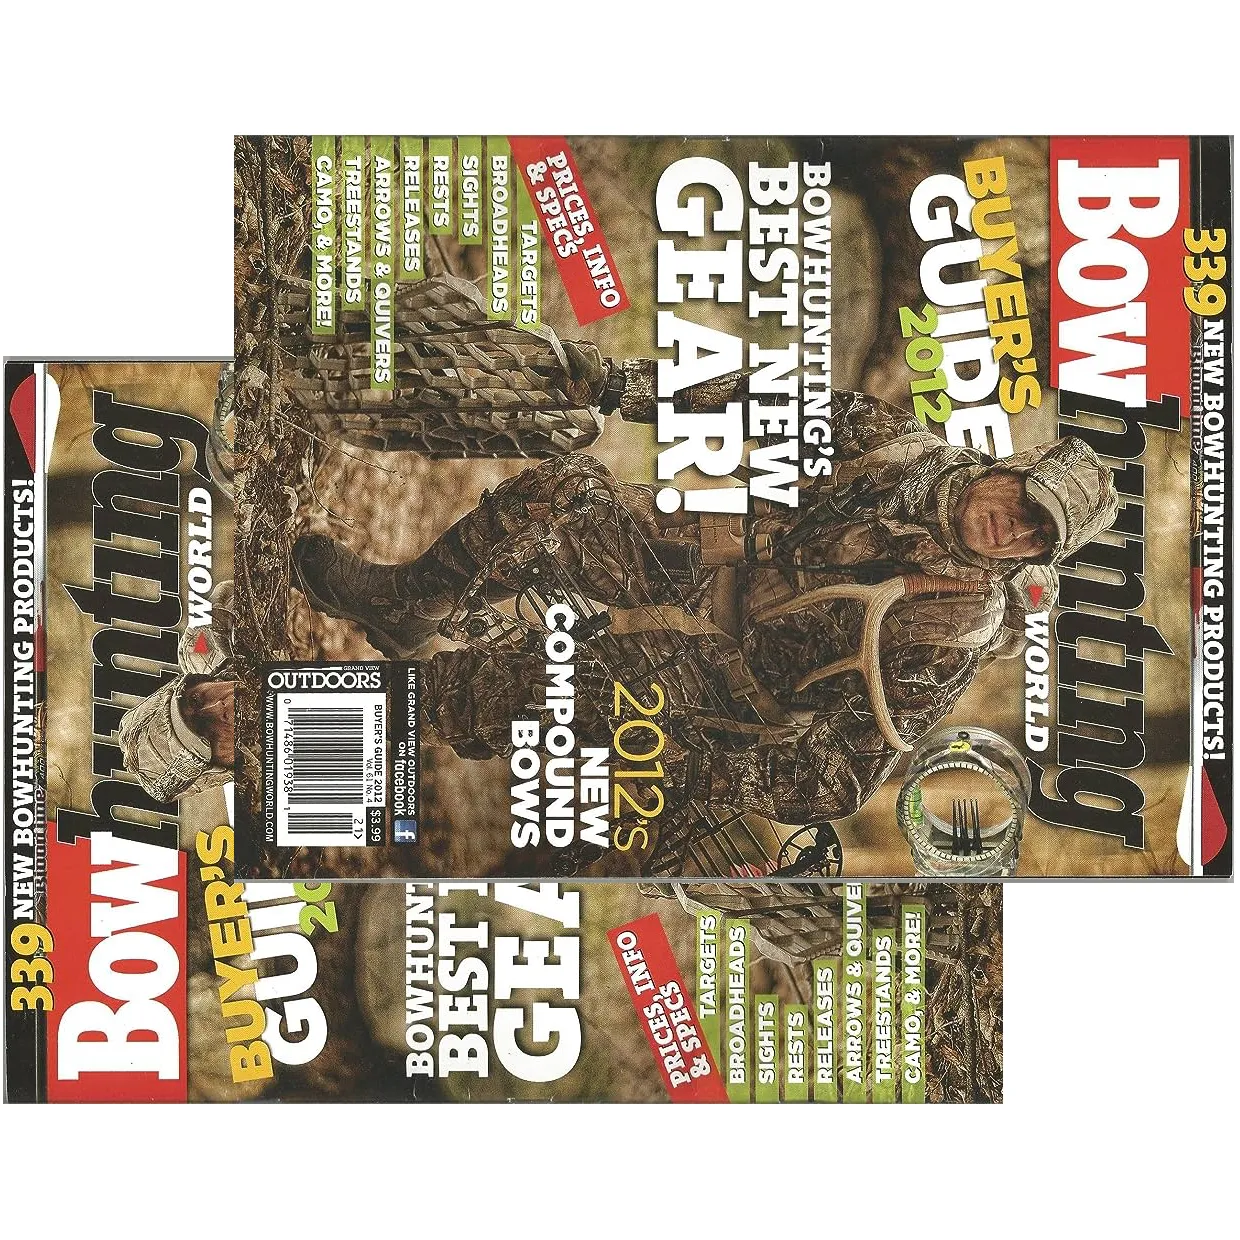 Free Subscription To Bowhunting World, Predator Xtreme Or Whitetail Journal